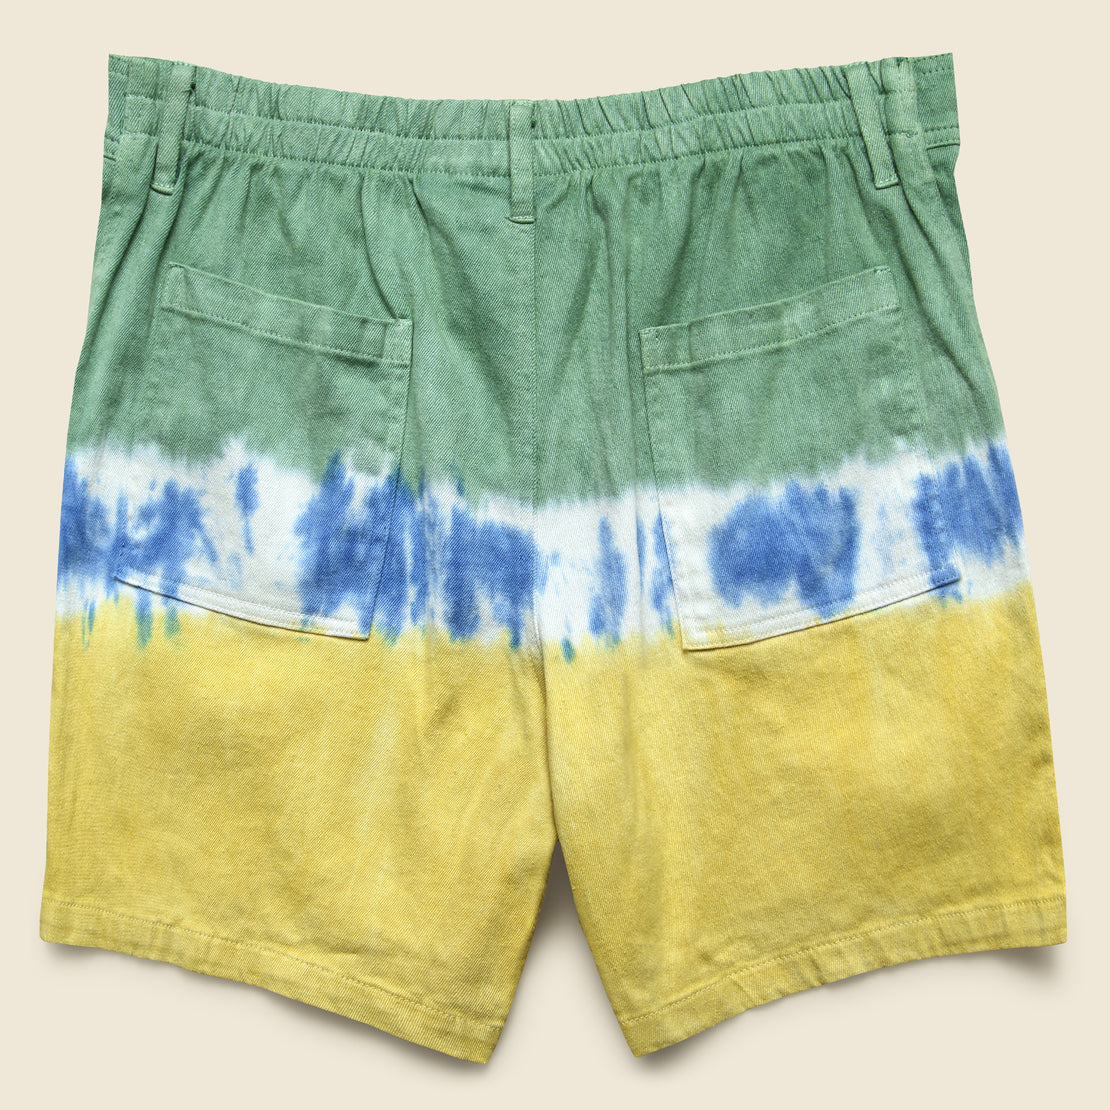 Venice Short - Spruce Green Dip Dye - Jungmaven - STAG Provisions - W - Shorts - Other